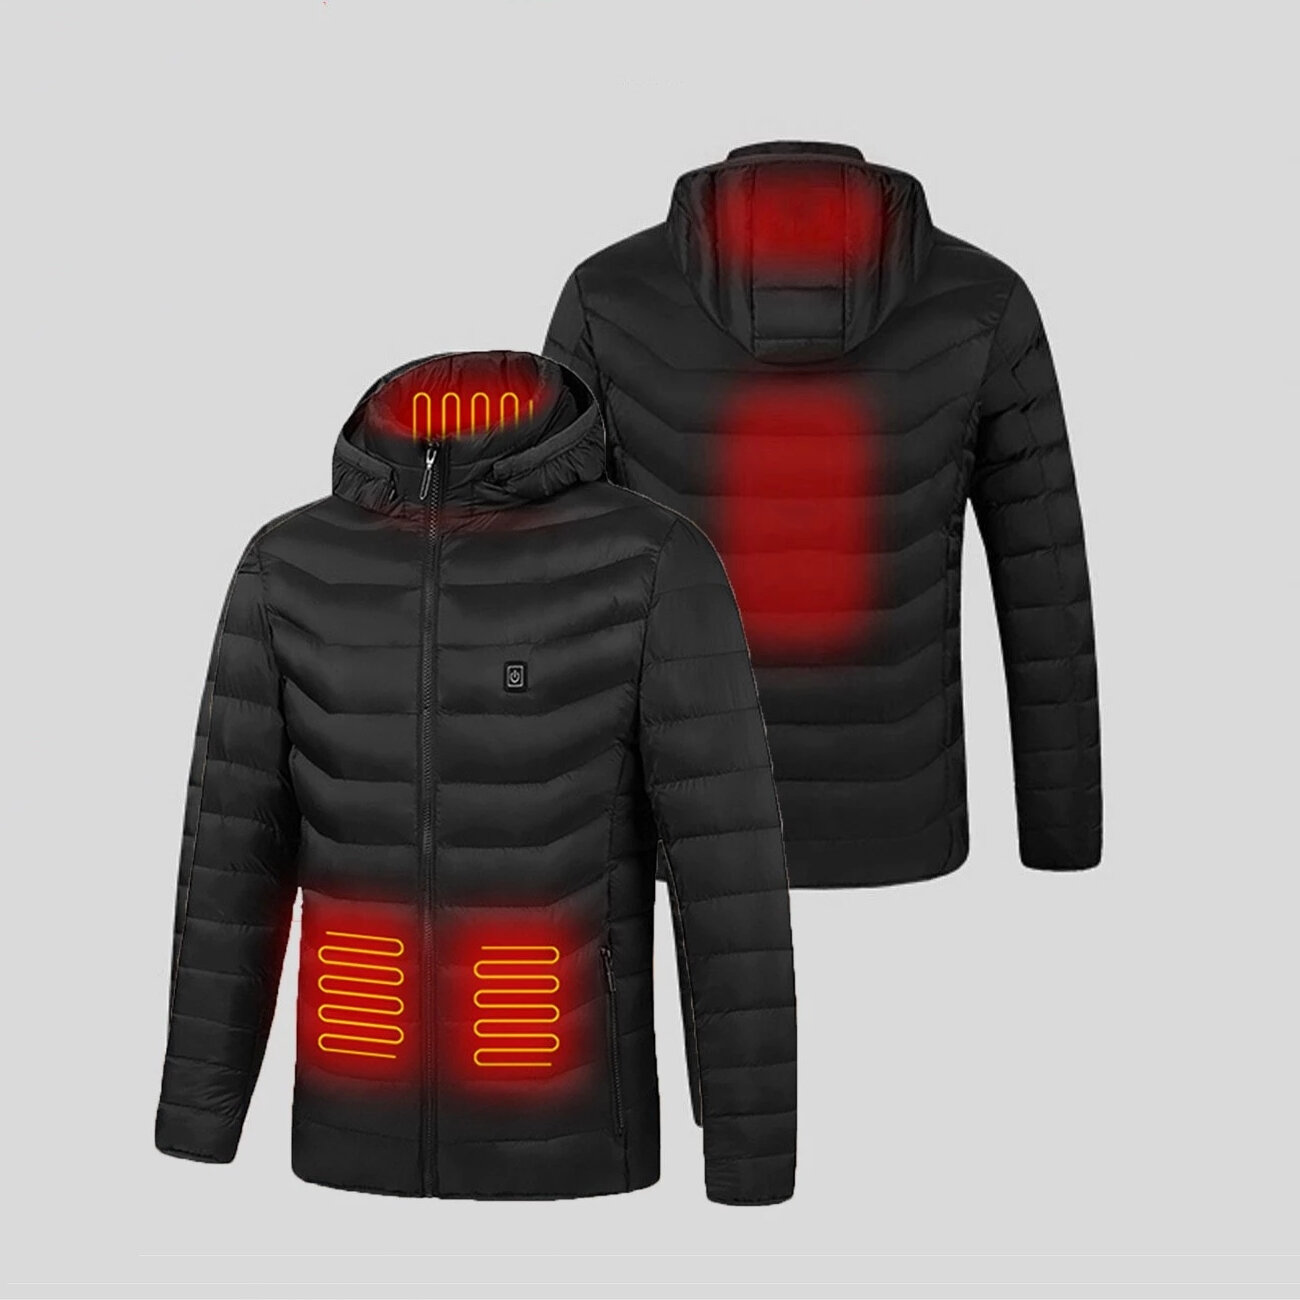 

4 Areas Winter Outdoor Charging Heating Jackets Temperaturing Heated Jackets USB Men's Women's Warm Sports Thermal Heata